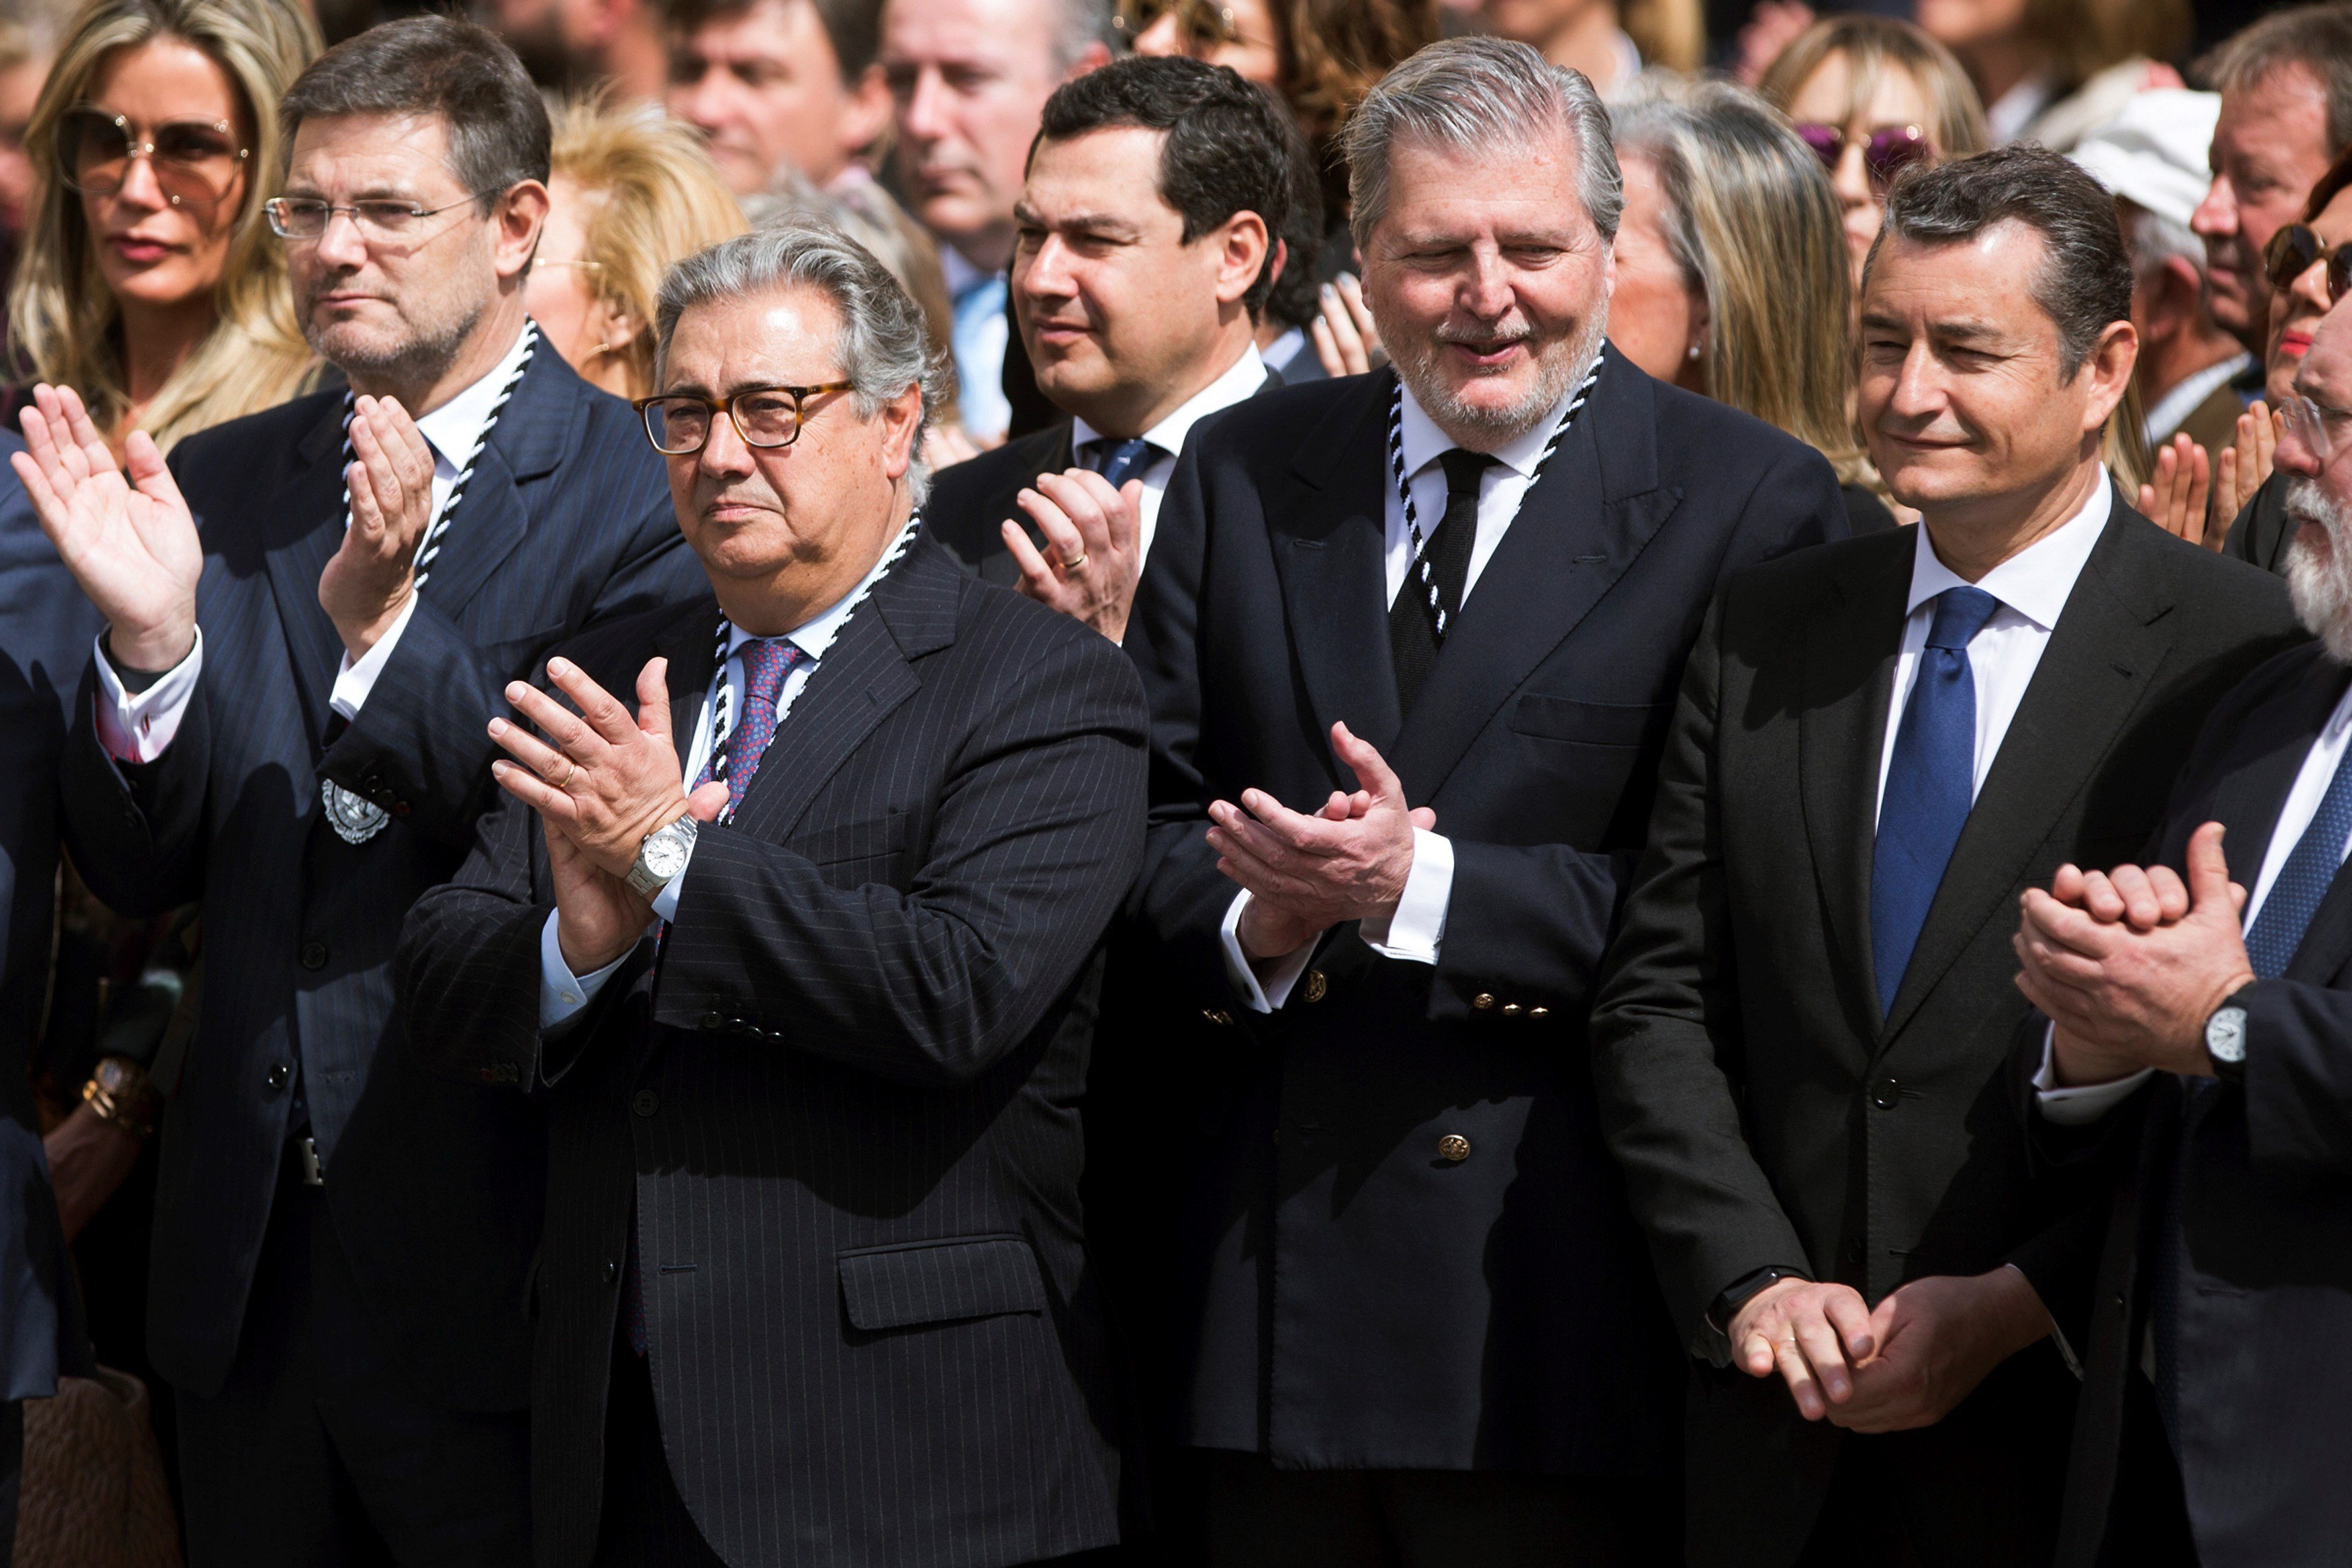 Four Spanish ministers sing 'The bridegroom of death' during Easter parade